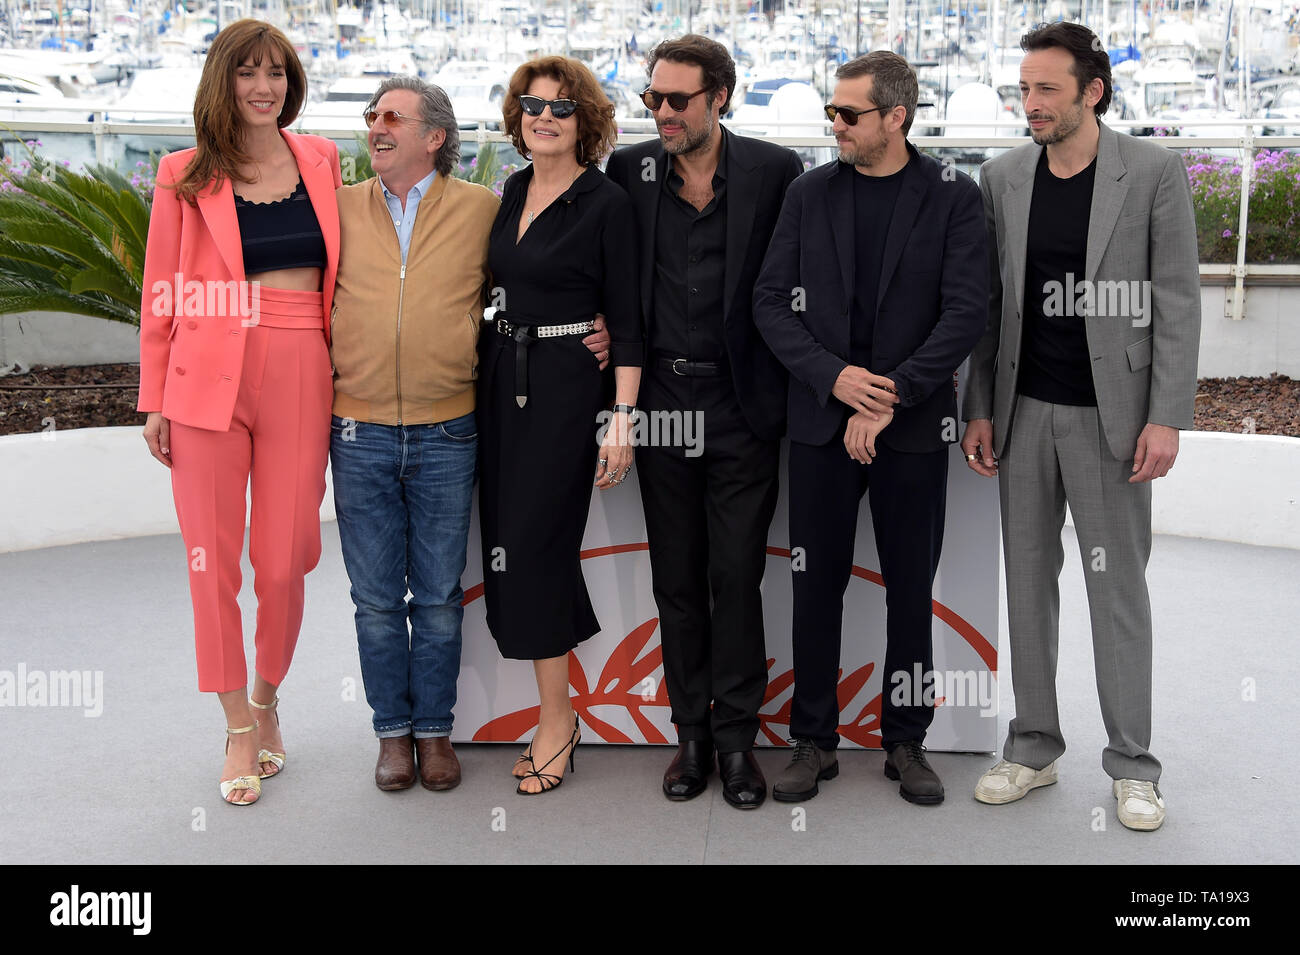 Pacific abort Ashley Furman Cannes, France. 21st May, 2019. 72nd Cannes Film Festival 2019, Photocall  film : ""˜La belle epoque' Pictured: Nicolas Bedos, Doria Tillier, Fanny  Ardant, Daniel Auteuil, Guillame Canet, Michael Cohen Credit: Independent  Photo